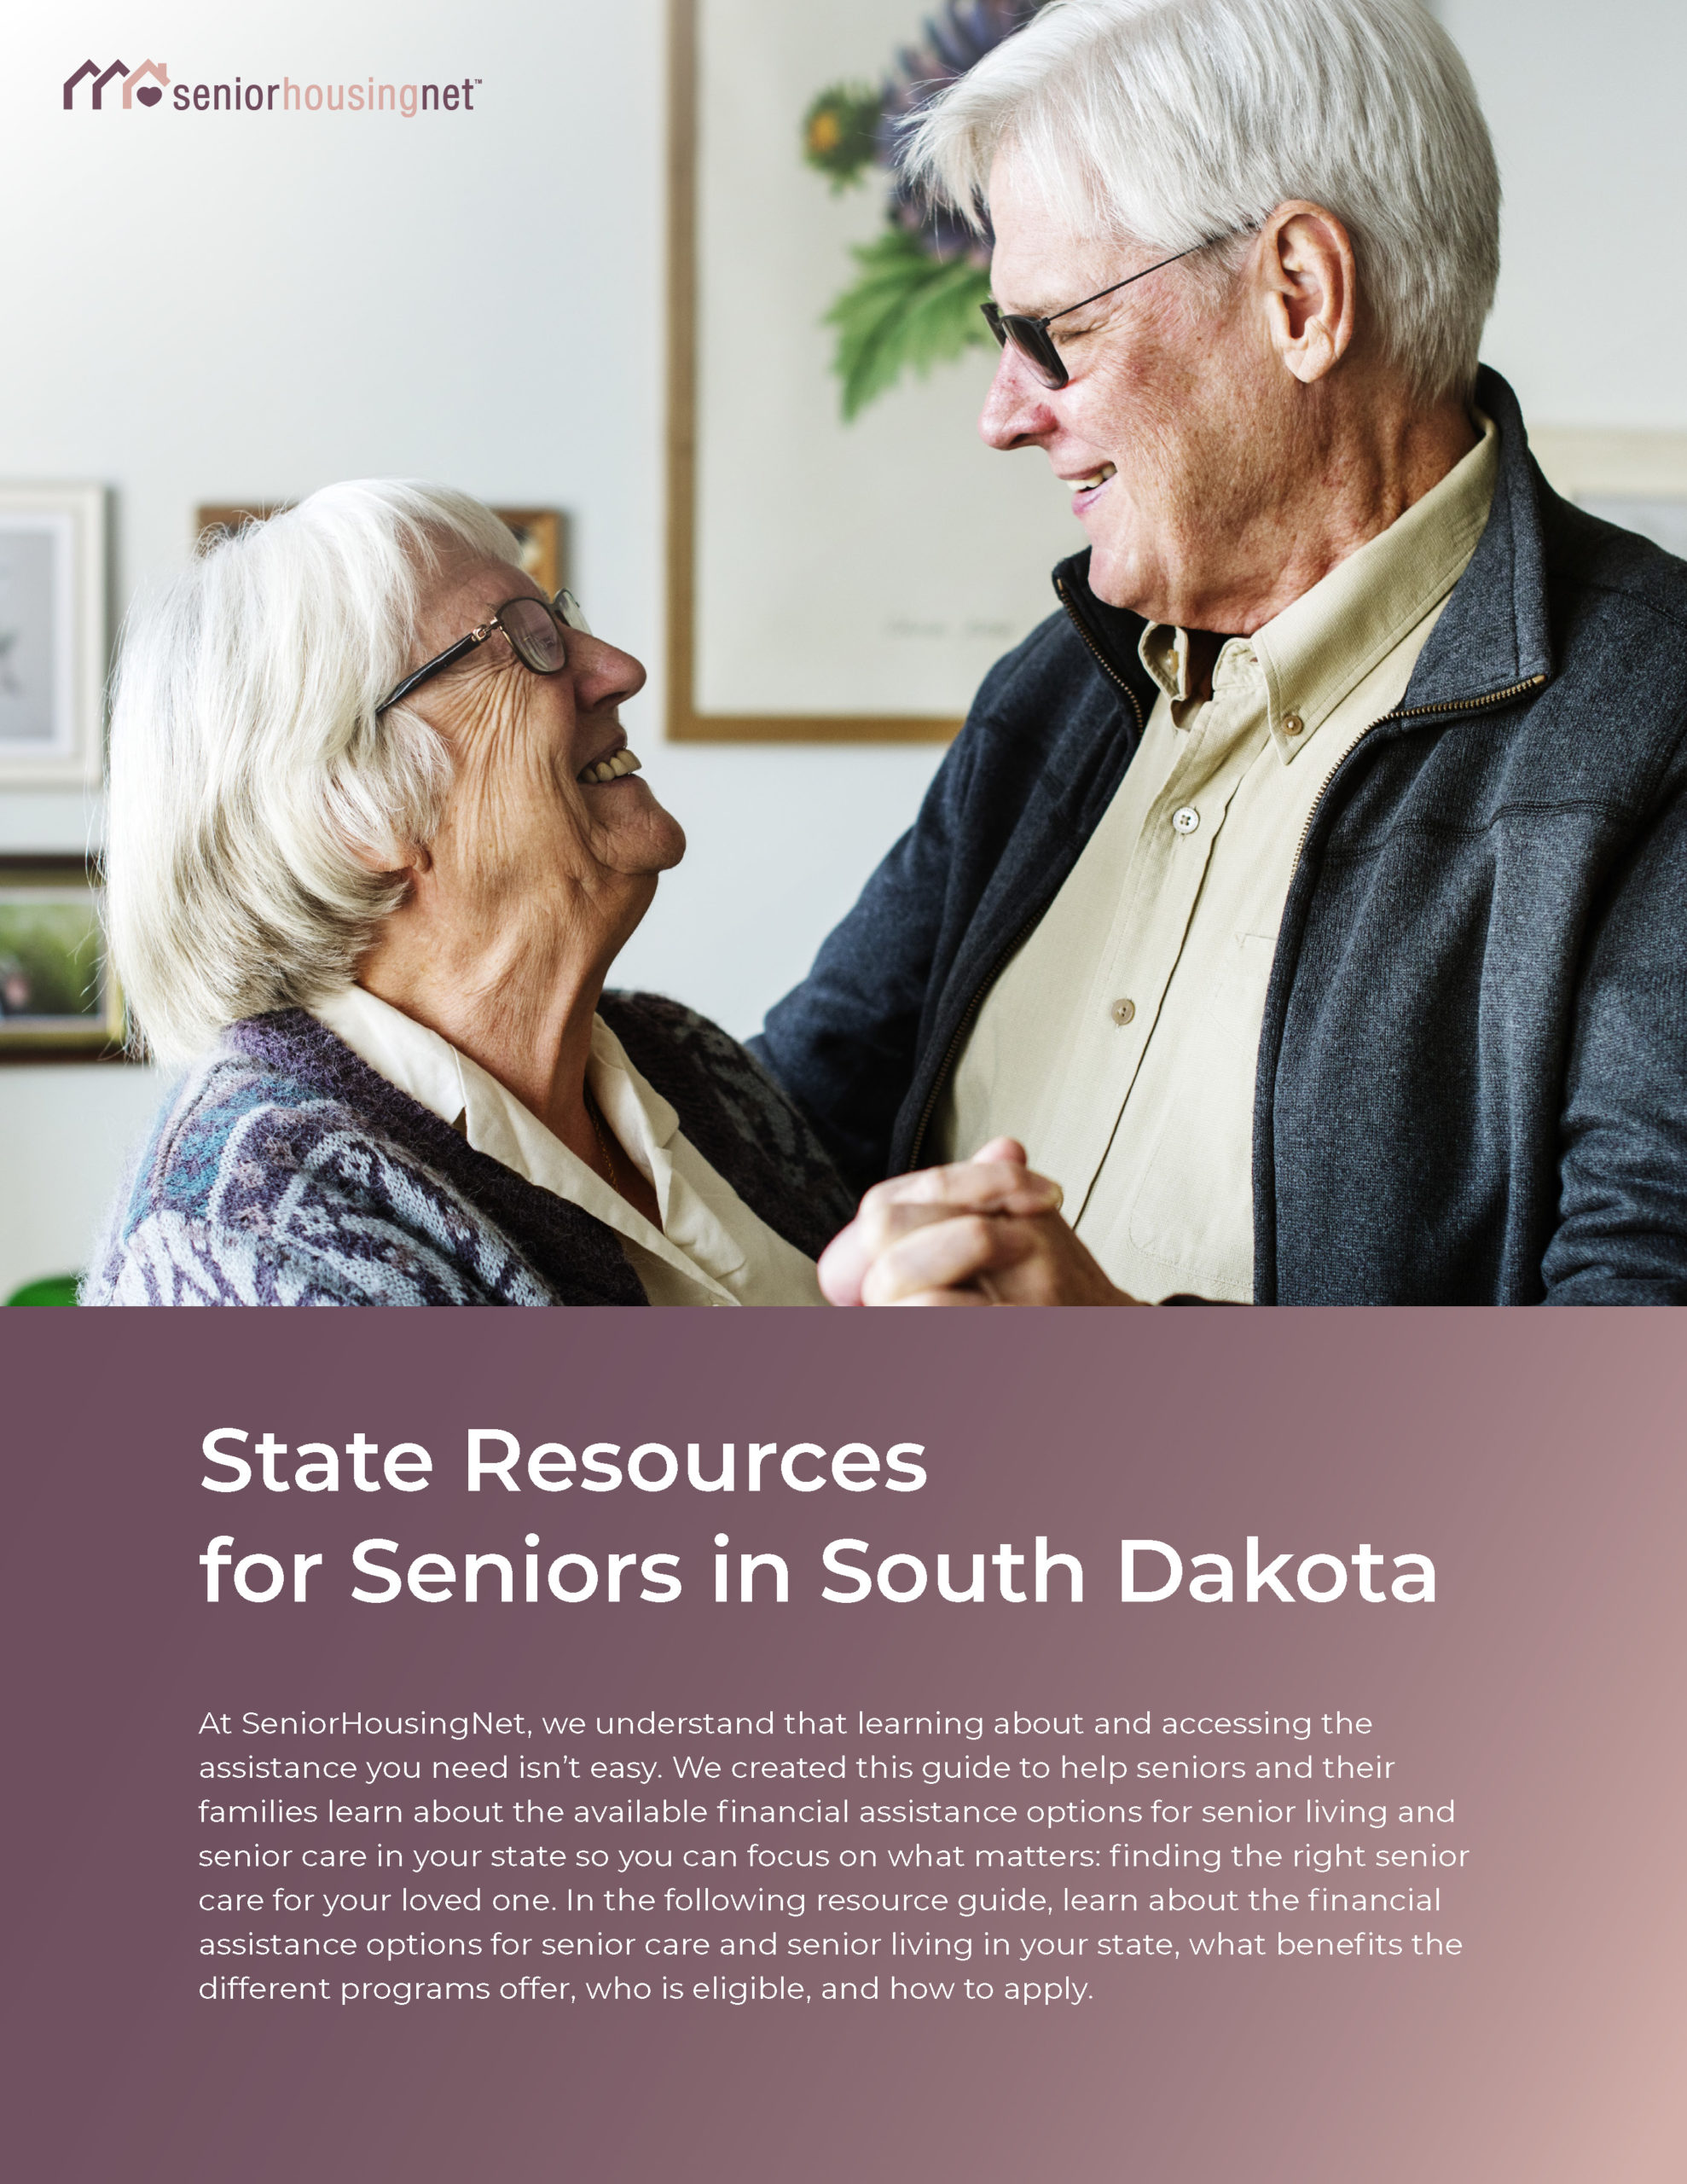 State Resources for Seniors in South Dakota